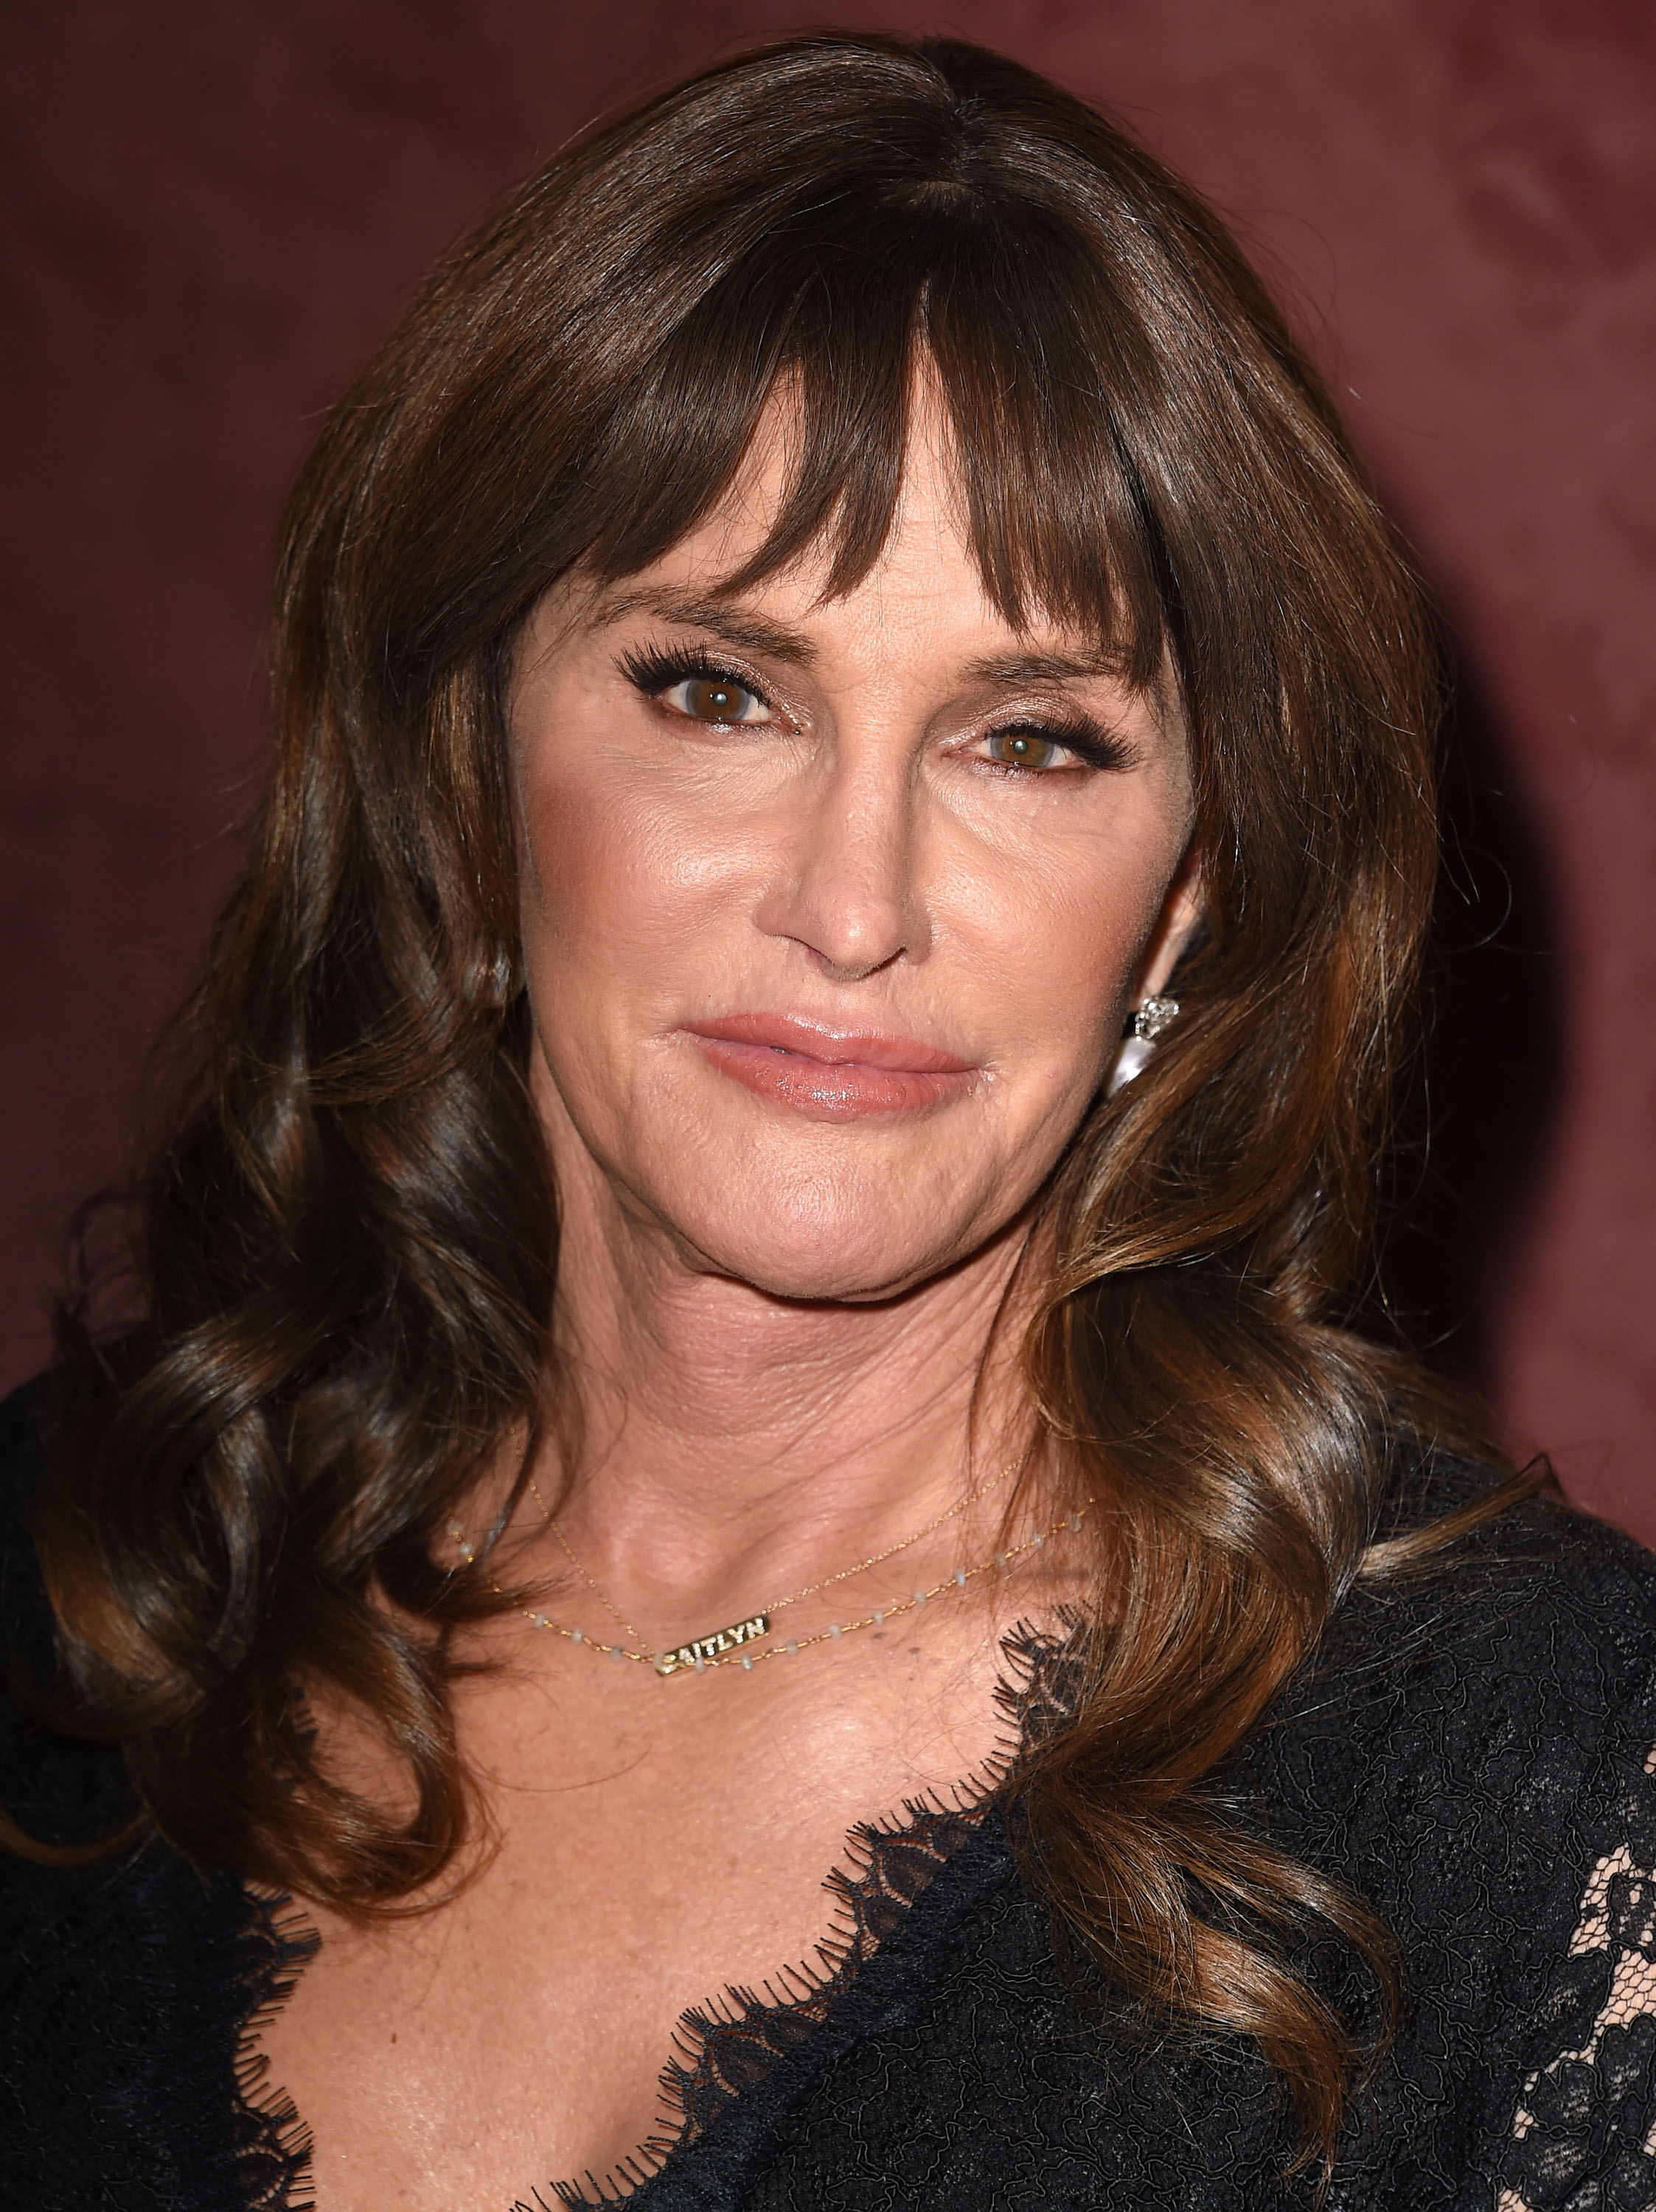 Caitlyn Jenner at a Special Screening Of "Tangerine" on Jan. 4, 2016 in Los Angeles. (Steve Granitz—WireImage/Getty Images)